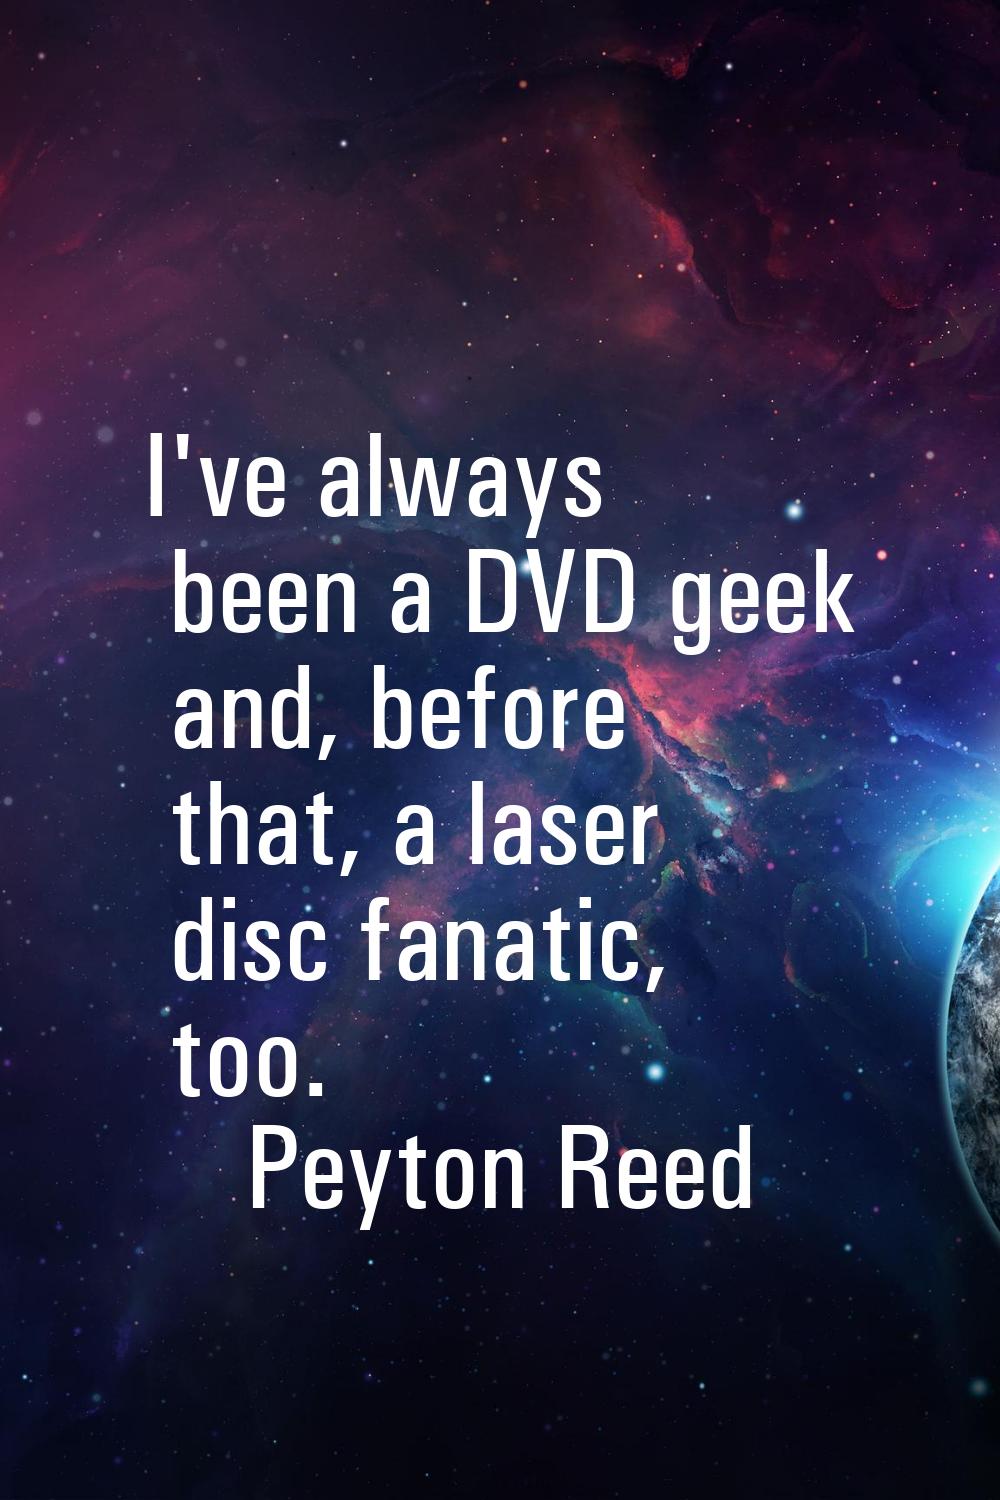 I've always been a DVD geek and, before that, a laser disc fanatic, too.